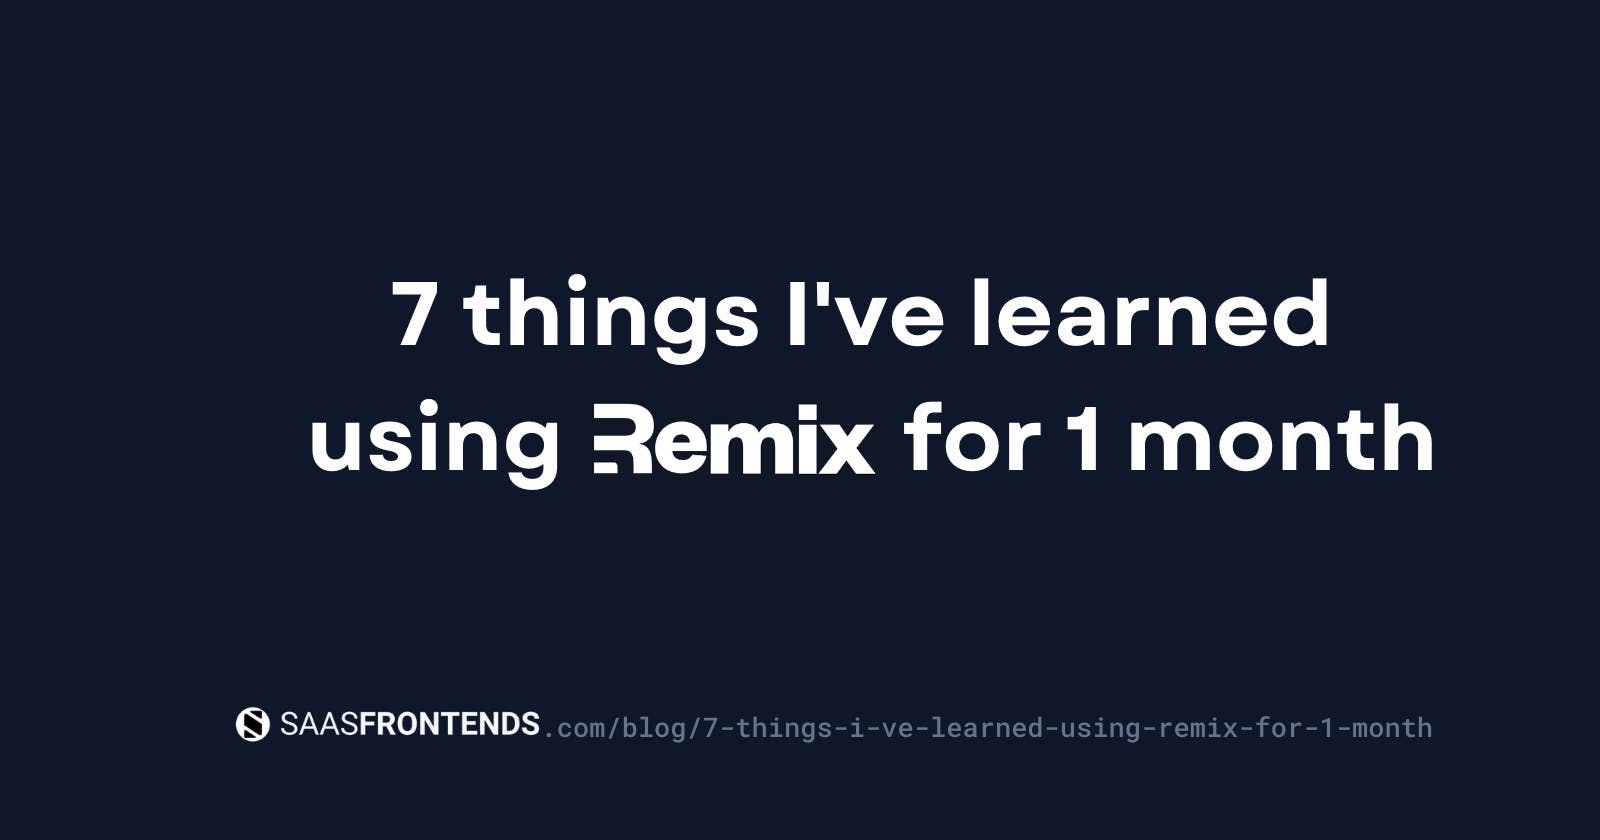 7 things I've learned using Remix for 1 month